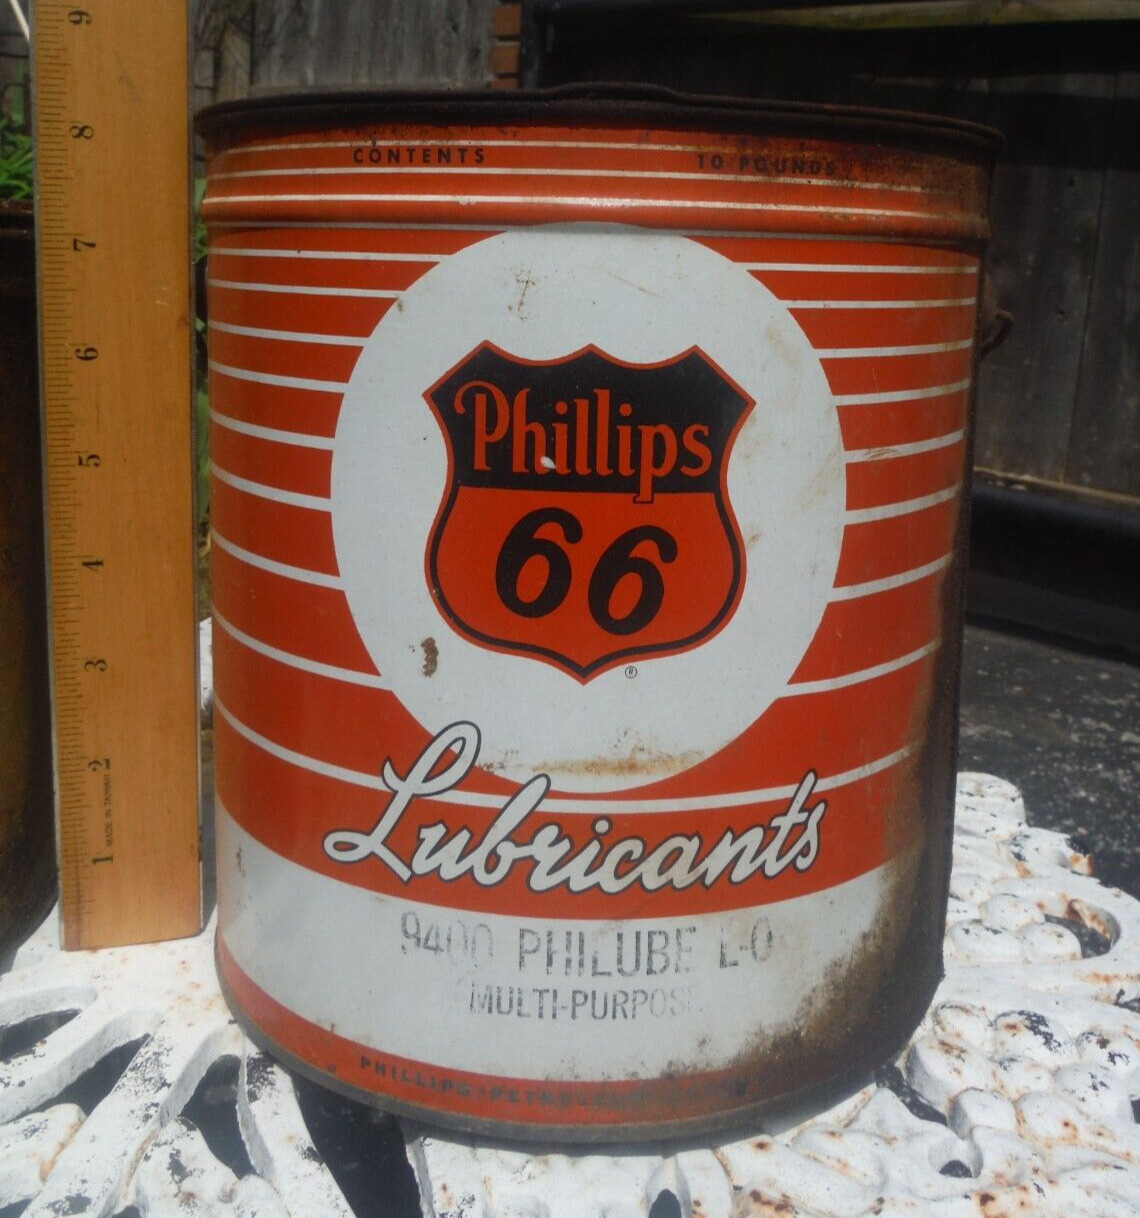 ANTIQUE/VINTAGE PHILLIPS 66 LUBRICANT 10 LB GREASE ADVERTISING CAN  9430 PHILUBE